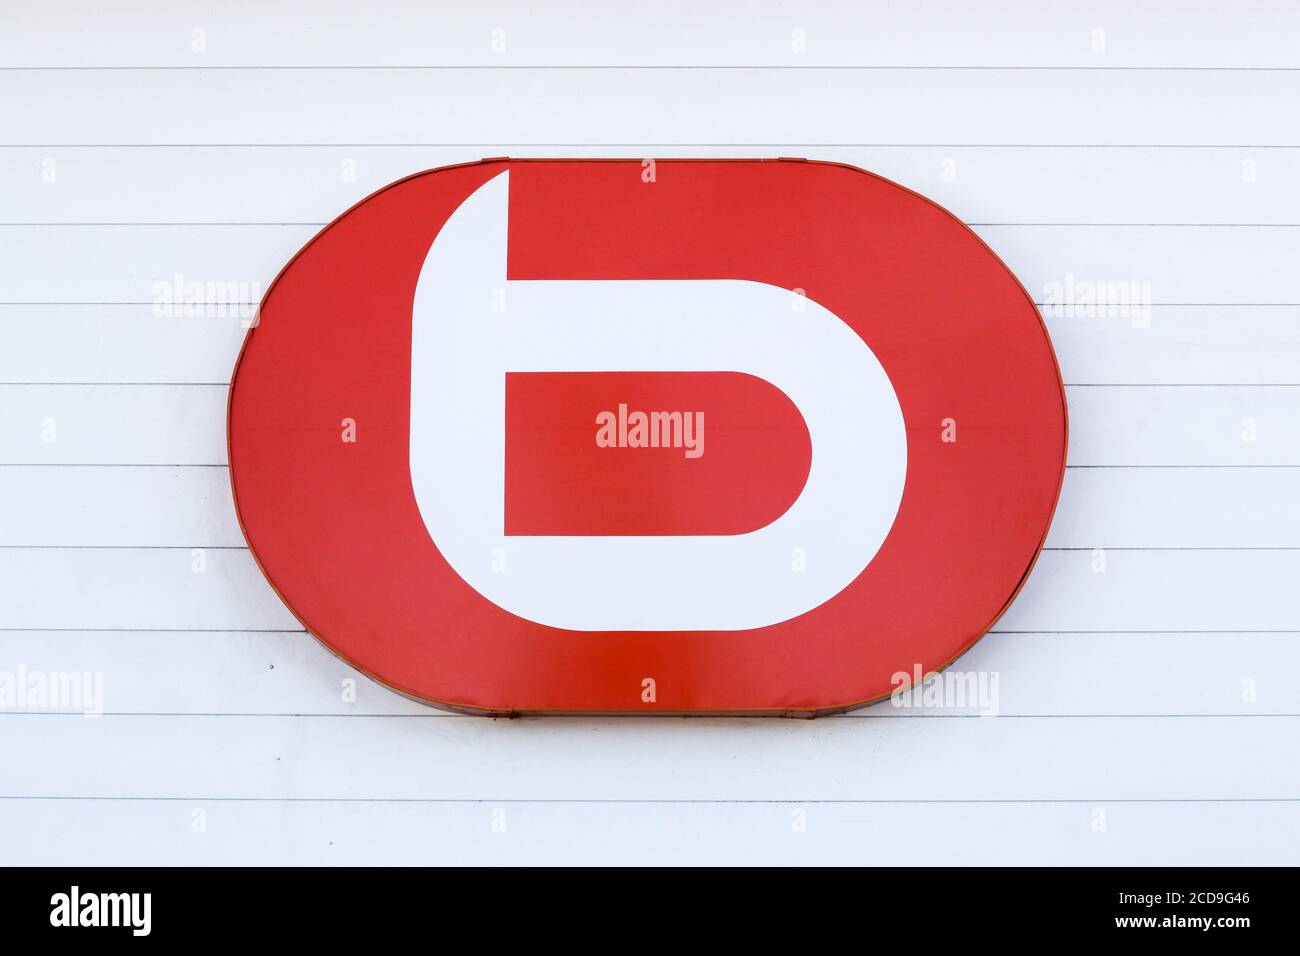 Villefranche, France - May 17, 2020: Boulanger logo on a wall. Boulanger is a French company specializing in leisure, electronics and household Stock Photo